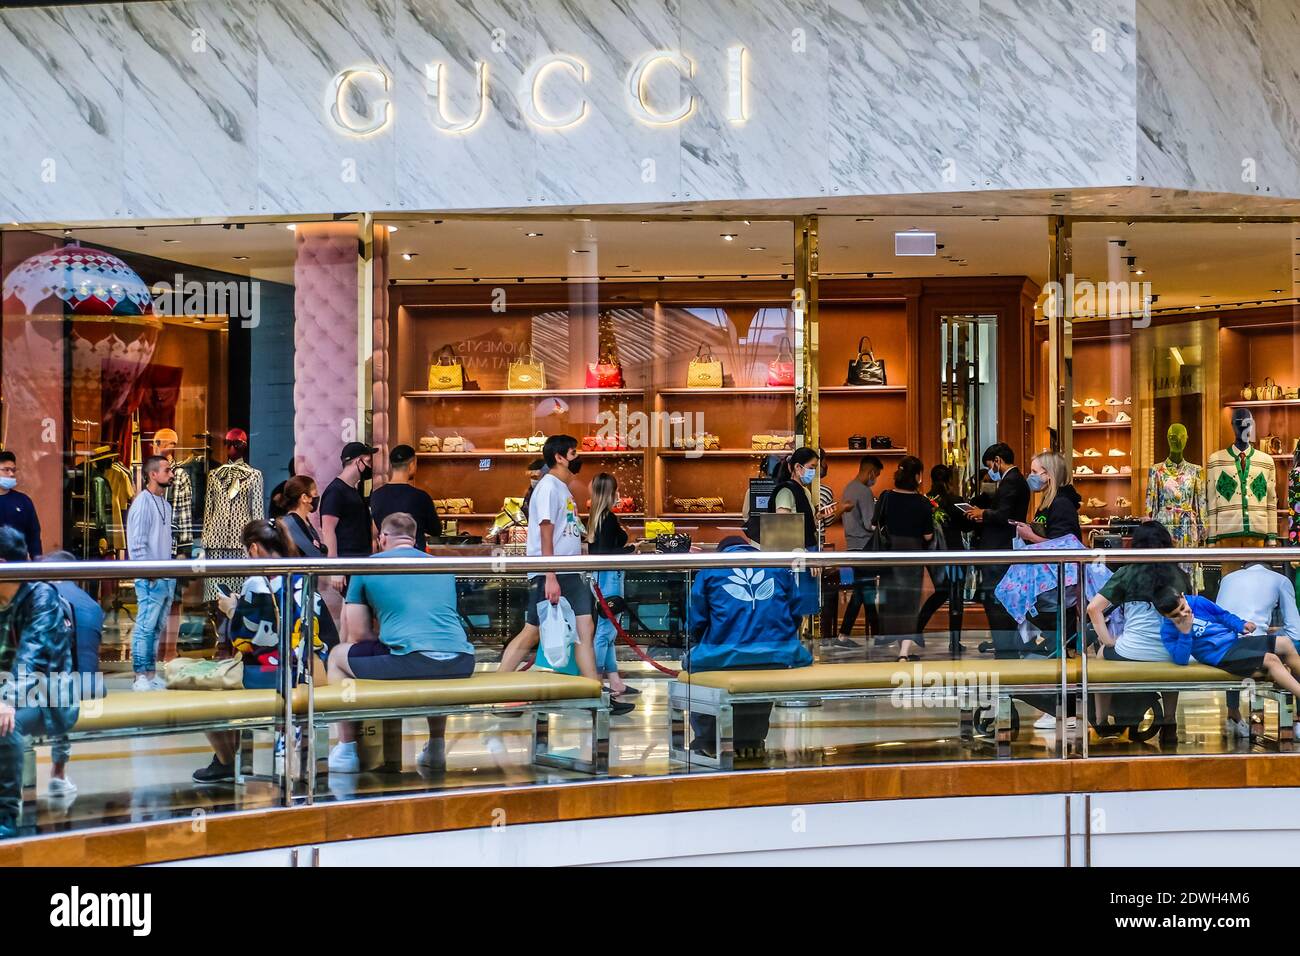 Australia. 23rd Dec, 2020. People lining up in front the Gucci store in